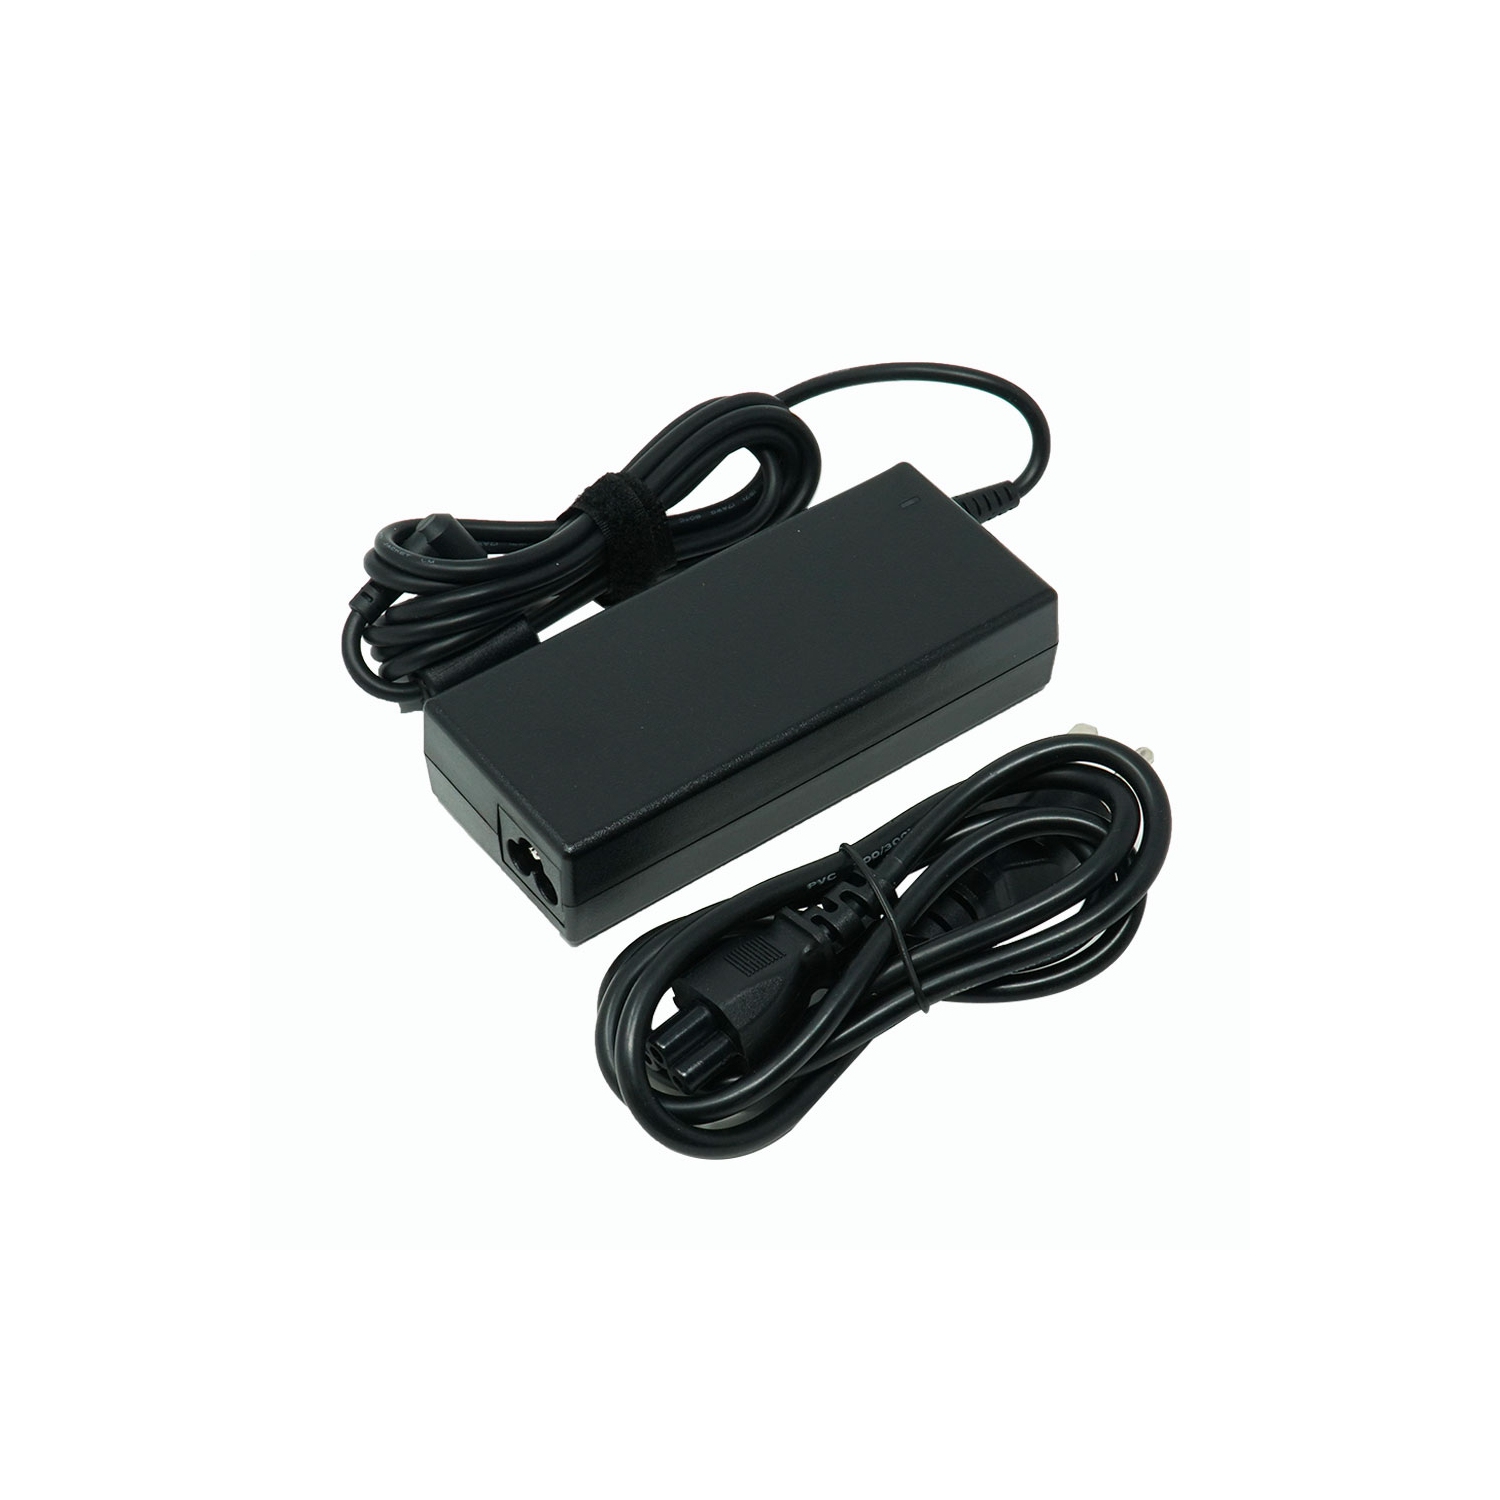 Dr. Battery - Notebook Adapter for Toshiba Dynabook R732 / RX3 / AX / 53C / 310-1958 / 7U870 / 9T458 - Free Shipping